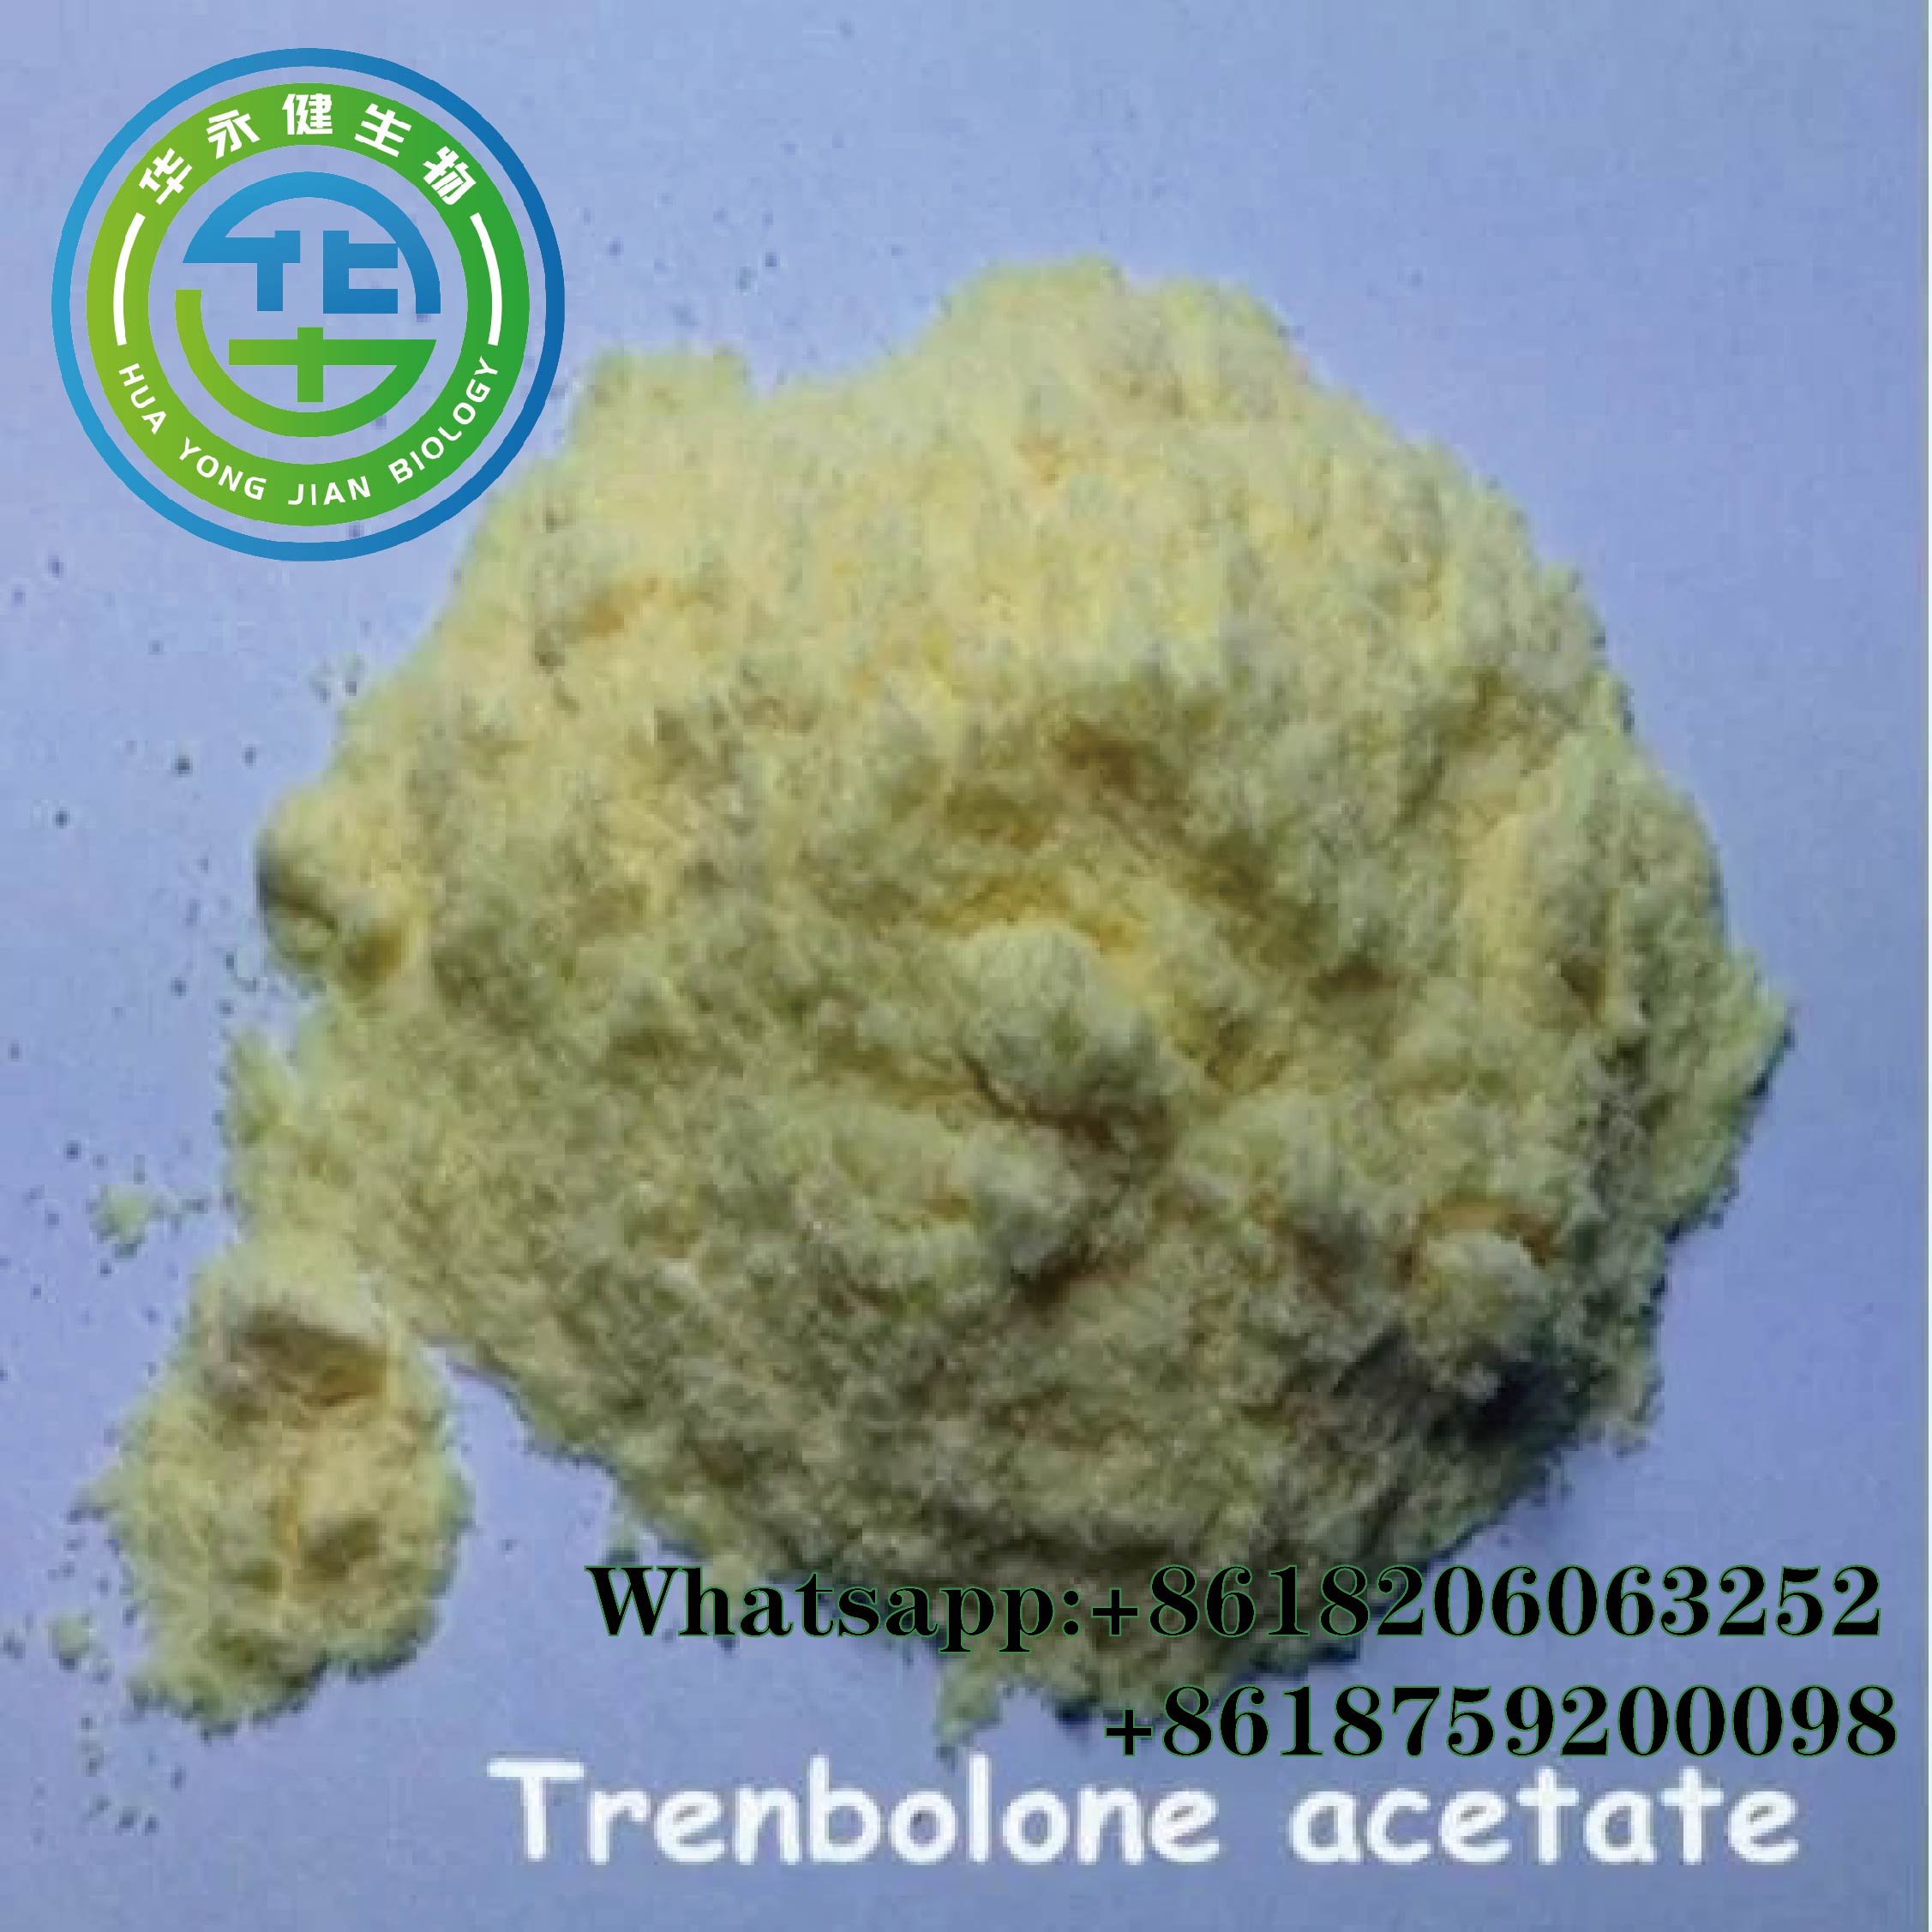 99.9% High Purity Trembolones Acetates Yellow Steroids Raw Powder alang sa Body Building Brazil Luwas nga Pagpadala Tren Acetate Muscle Strength Featured Image